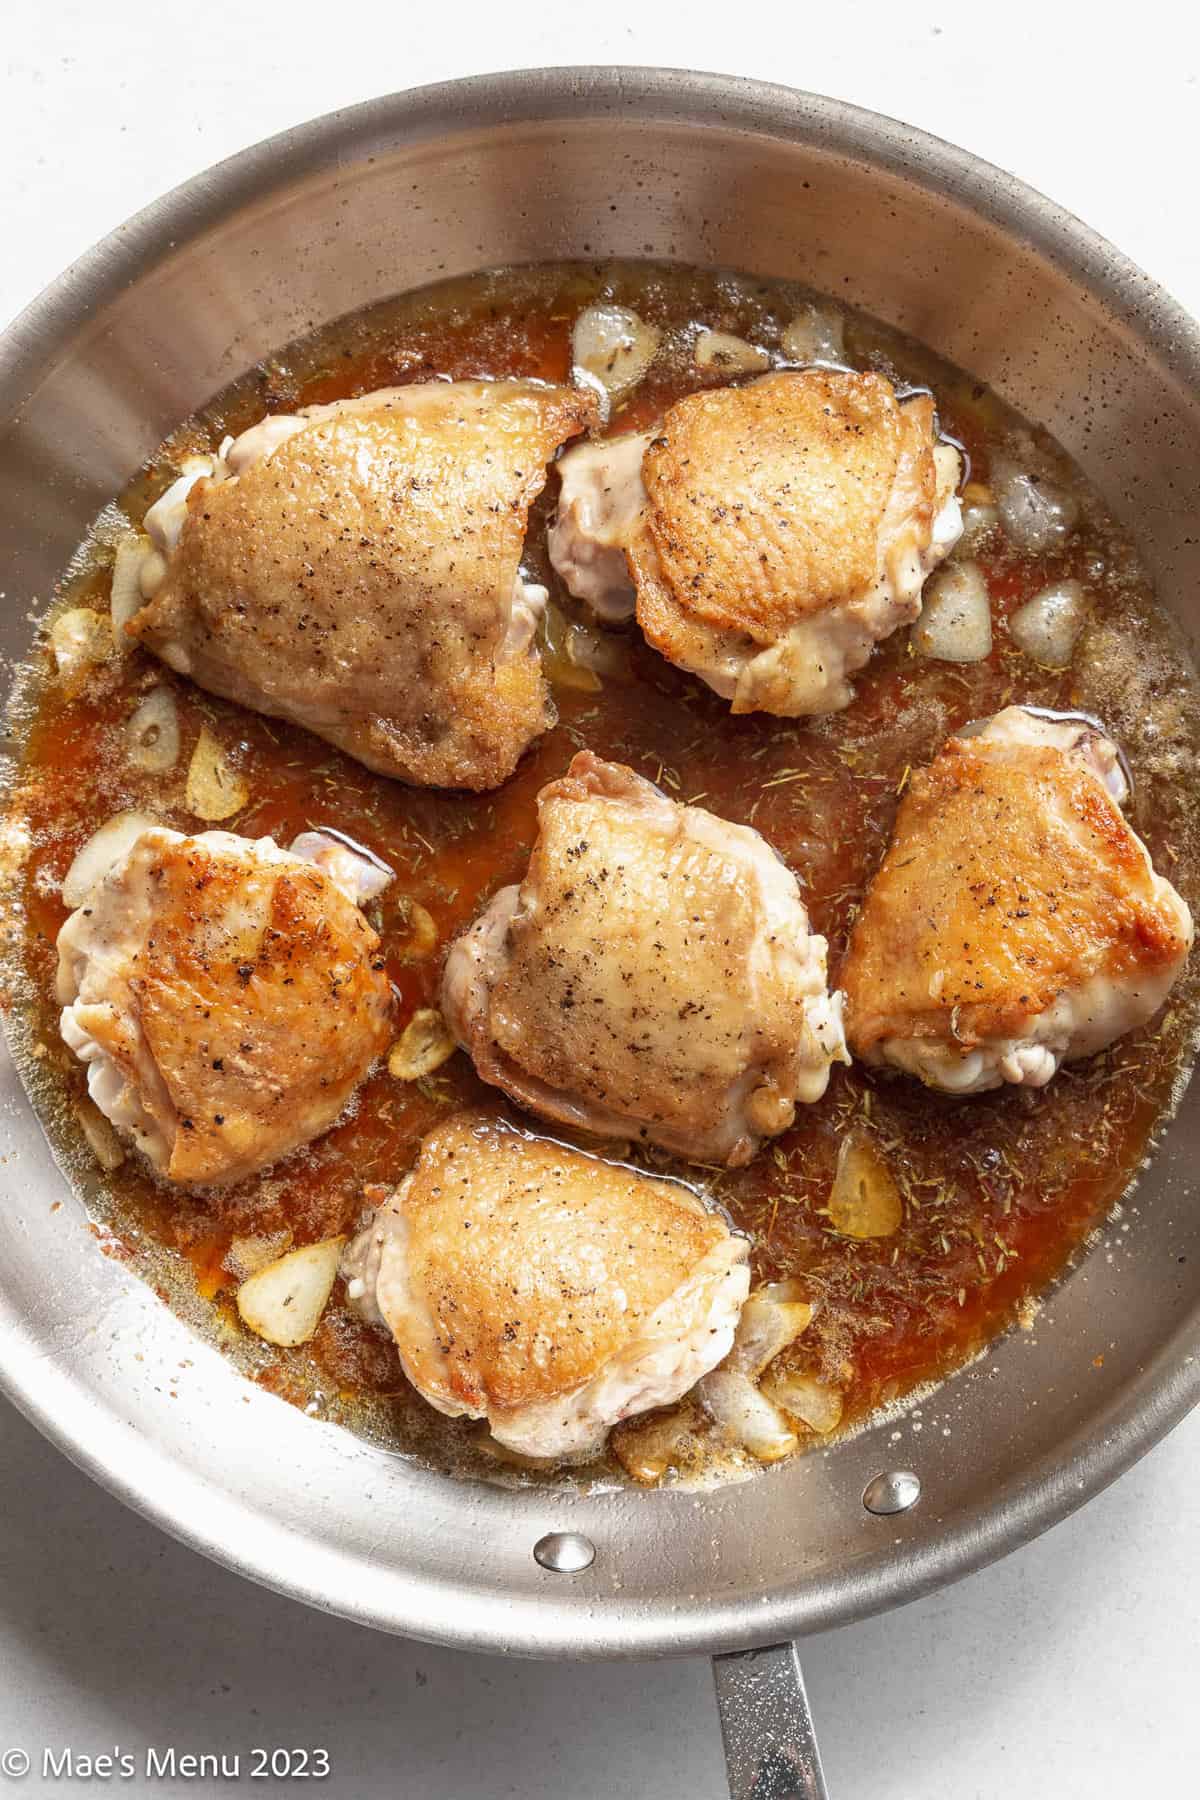 The honey garlic chicken thighs in a skillet with the sauce before roasting in the oven.